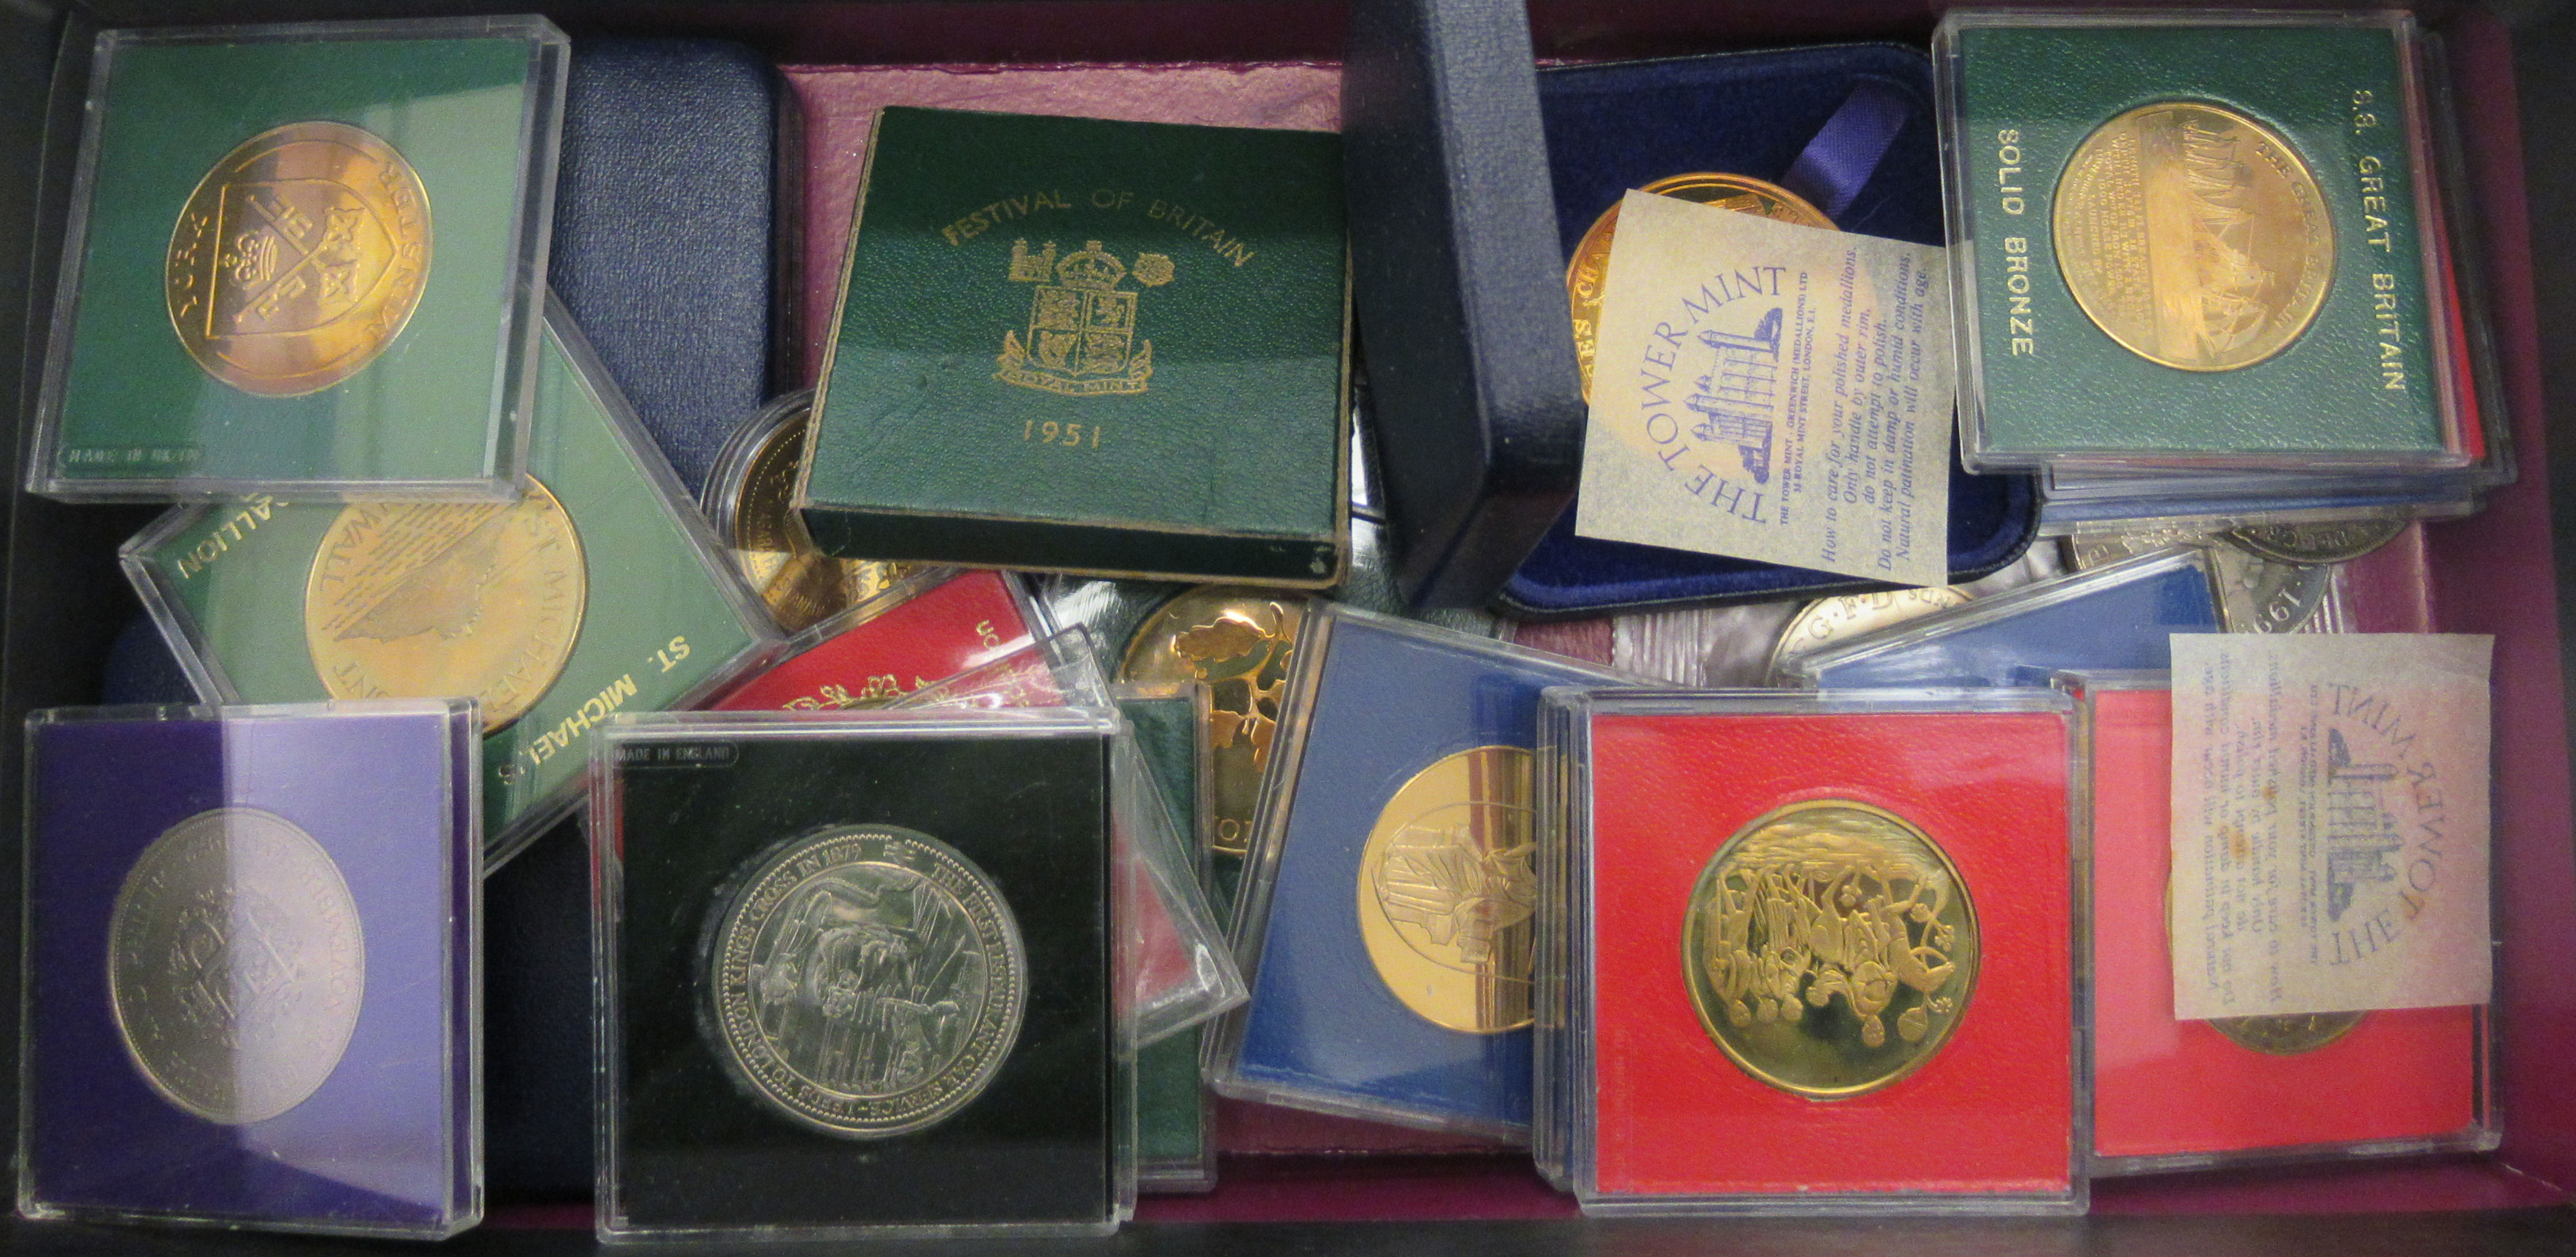 Uncollated, mainly British pre-decimal coins, some silver Westminster mint issues; £5 coins; and - Image 4 of 4